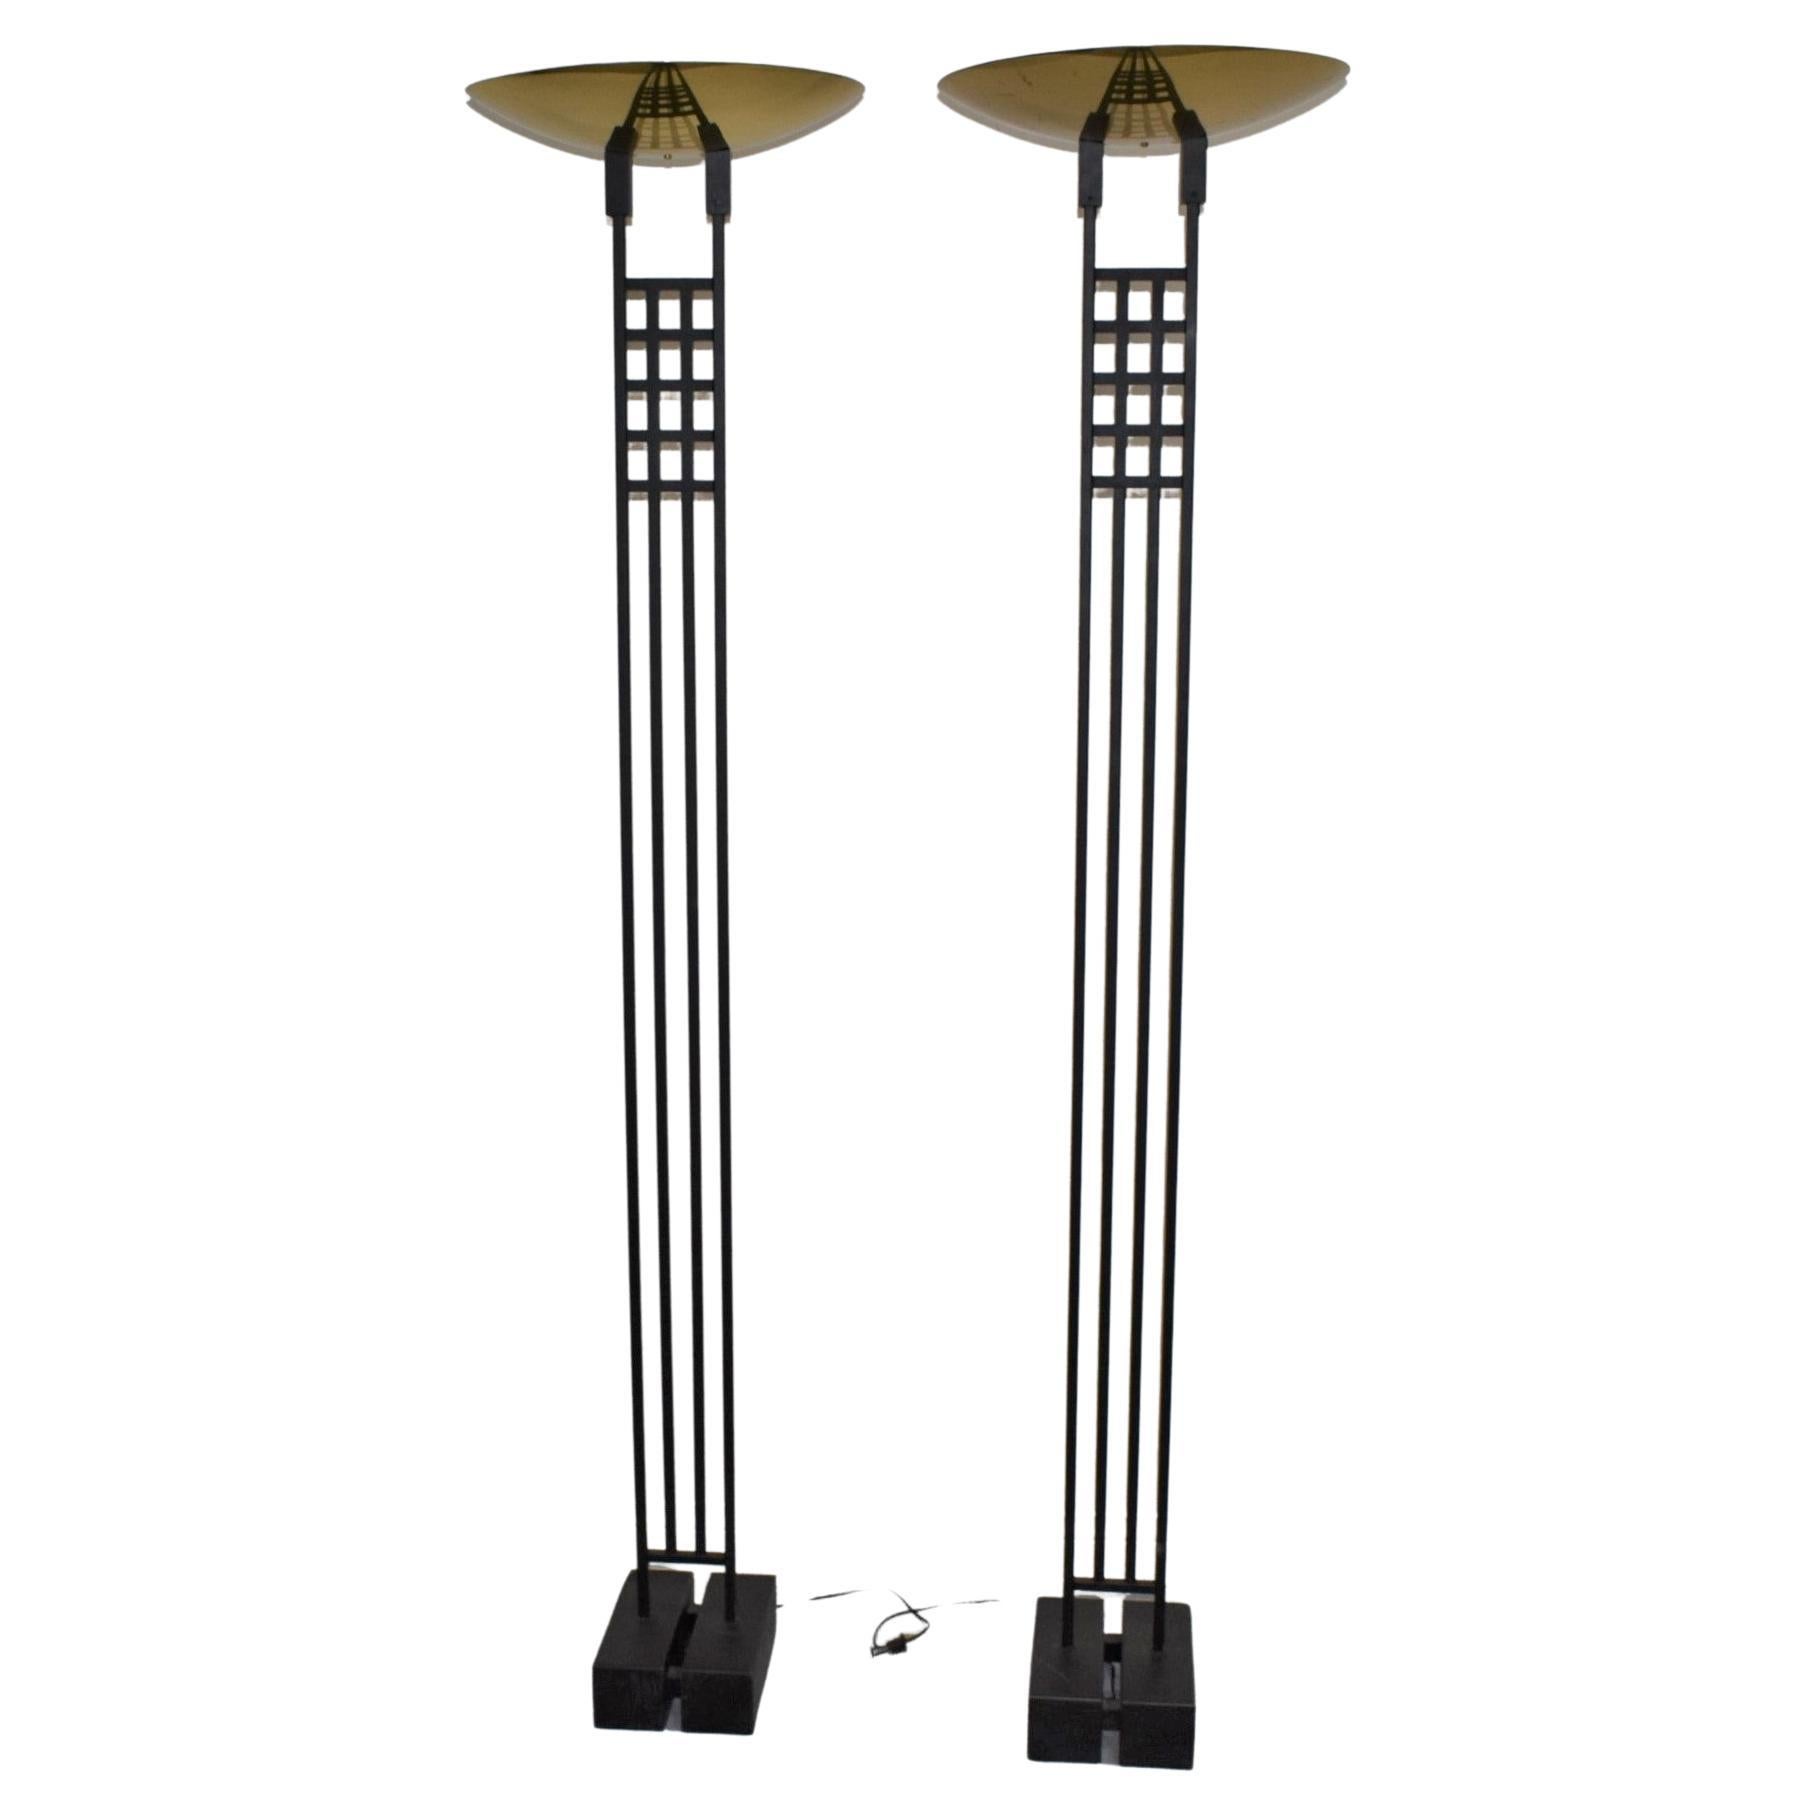 Step into the 1980s with our beautifully restored pair of Mid-Century Modern floor lamps. Expertly crafted from a harmonious blend of brass and metal, these lamps are in impeccable condition, resonating with the era's signature design. The lamps'